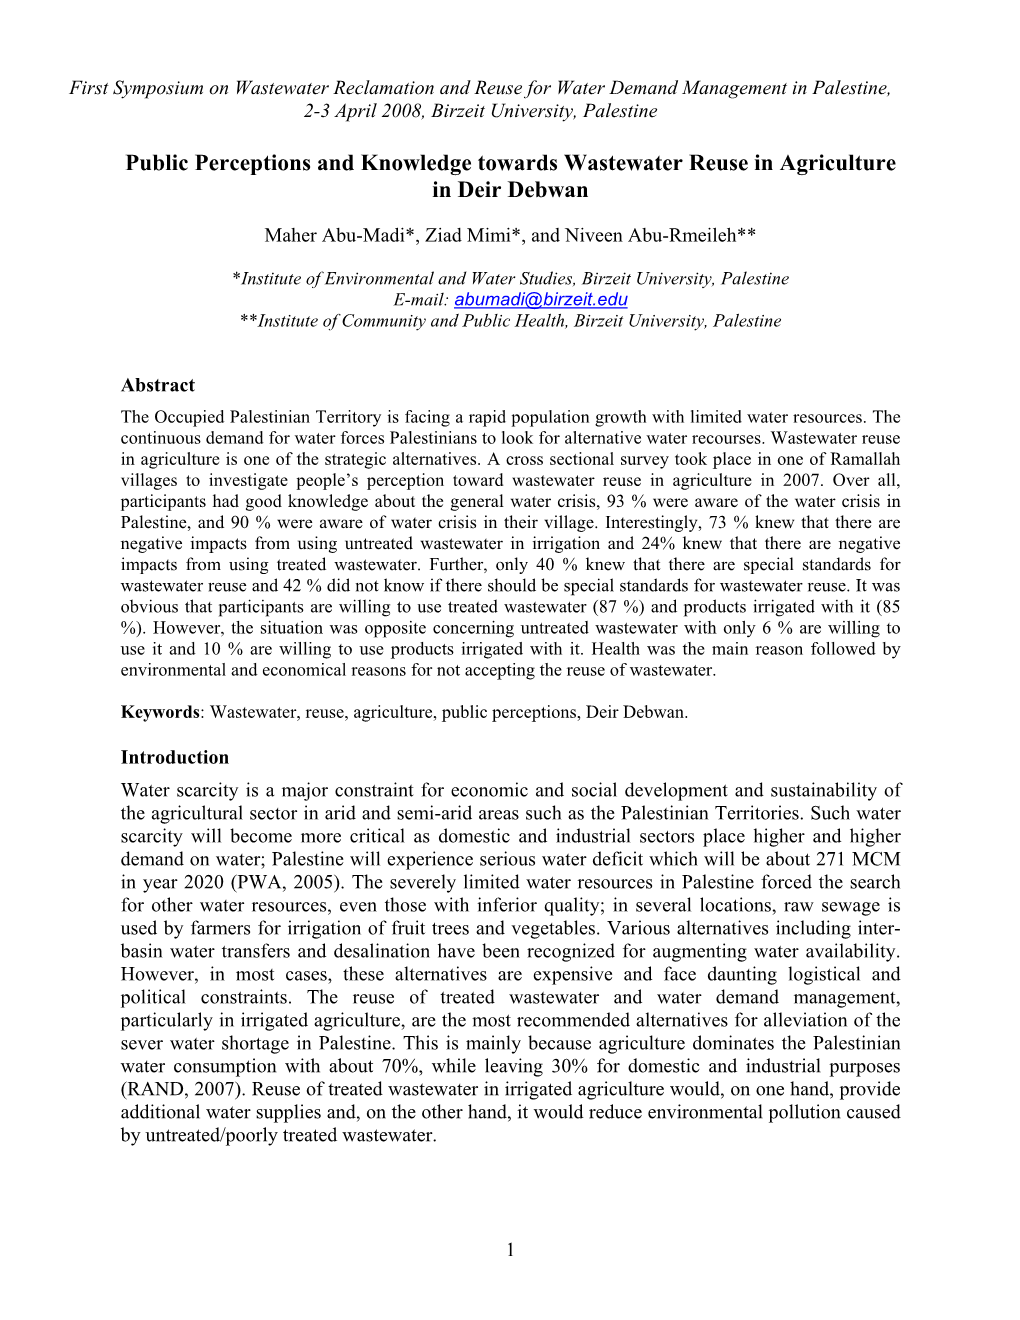 Public Perceptions and Knowledge Towards Wastewater Reuse in Agriculture in Deir Debwan